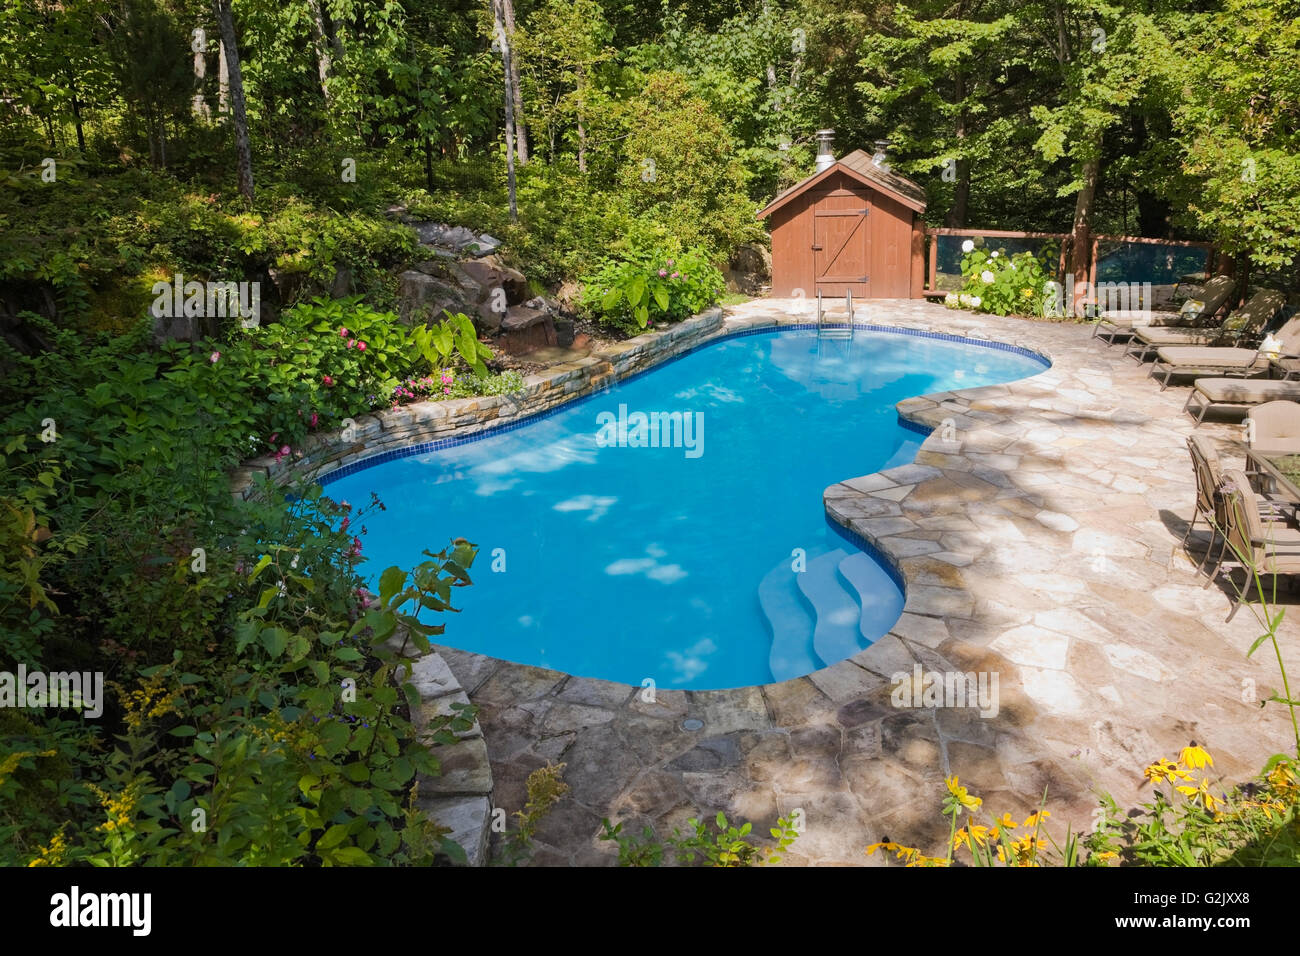 Inground Swimming Pool Waterfall Flagstone Decking In Landscaped Backyard In Summer Quebec Canada This Image Property Released Stock Photo Alamy